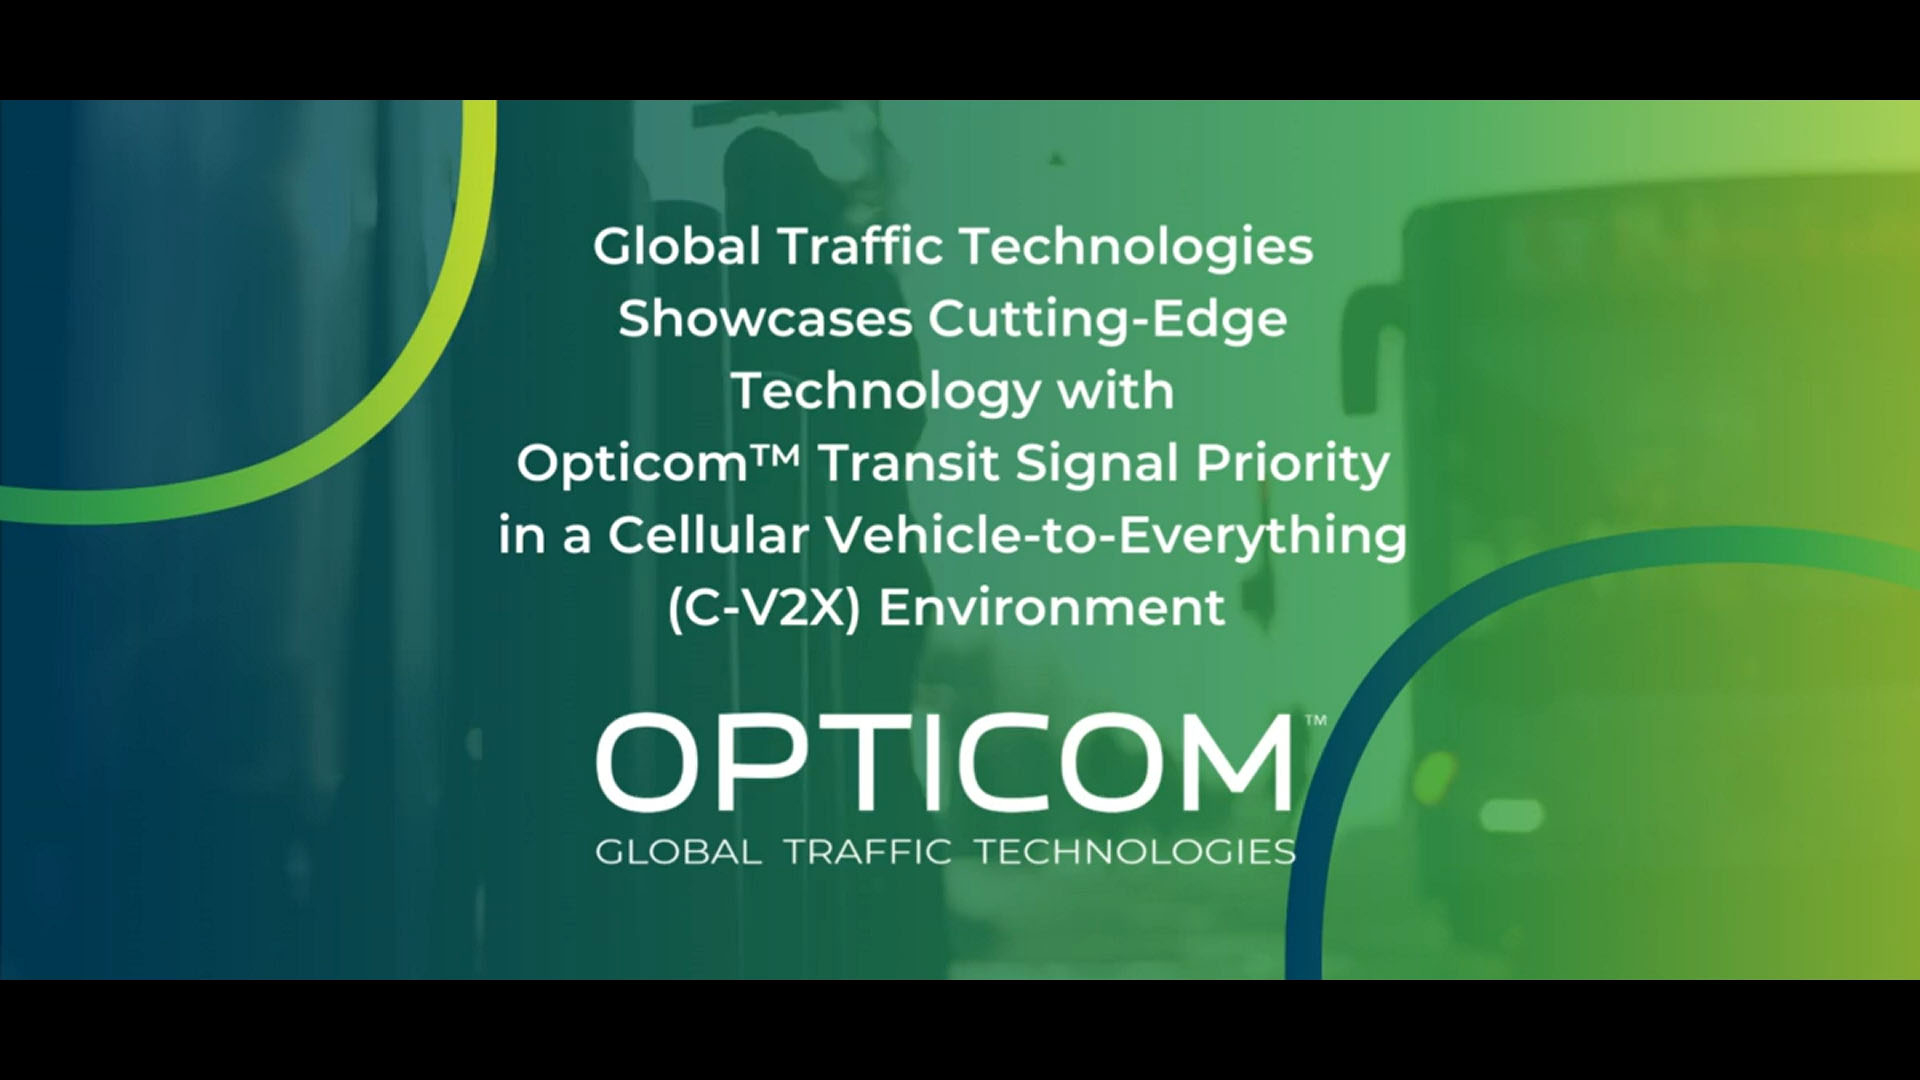 Global Traffic Technologies (GTT), is proud to announce the successful completion of the demonstration of Opticom™ Transit Signal Priority (TSP) in a Cellular Vehicle-to-Everything (C-V2X) environment. This innovative solution leverages real-time communication between transit vehicles and traffic signals utilizing the C-V2X standard. The demonstration was in partnership with Iteris, Inc. (NASDAQ: ITI), a leader in smart mobility infrastructure.